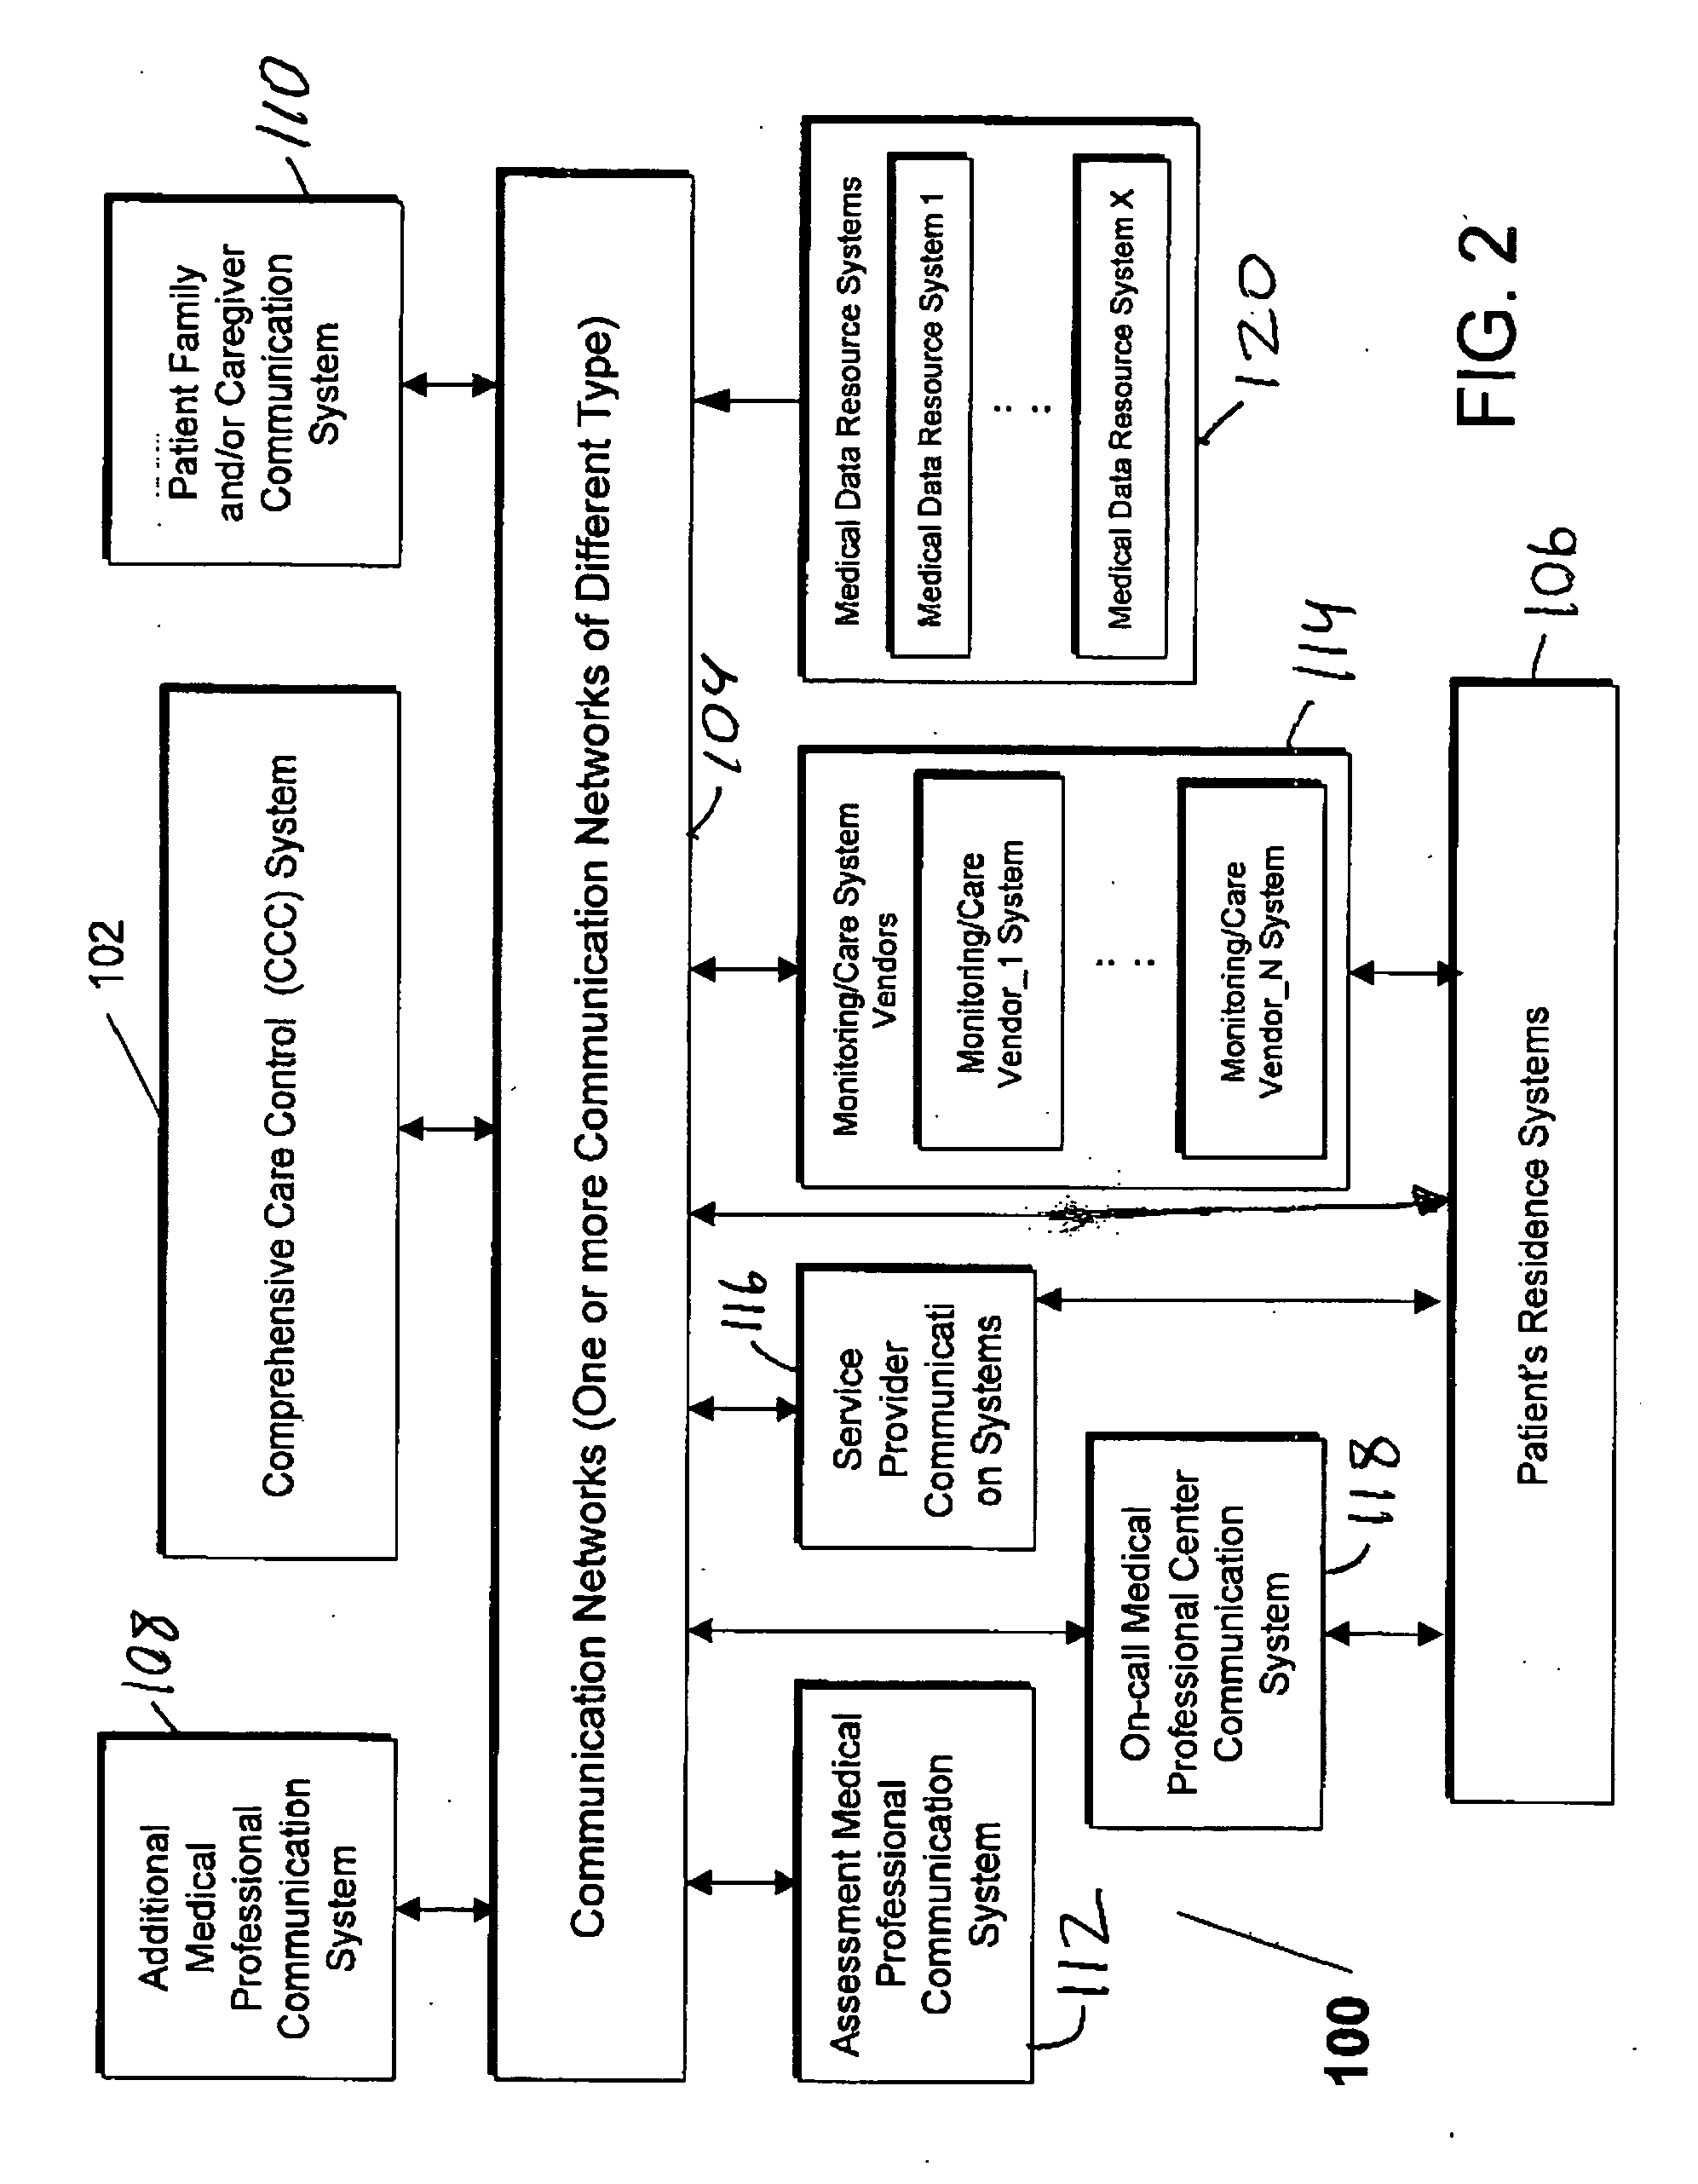 System and method for comprehensive remote patient monitoring and management